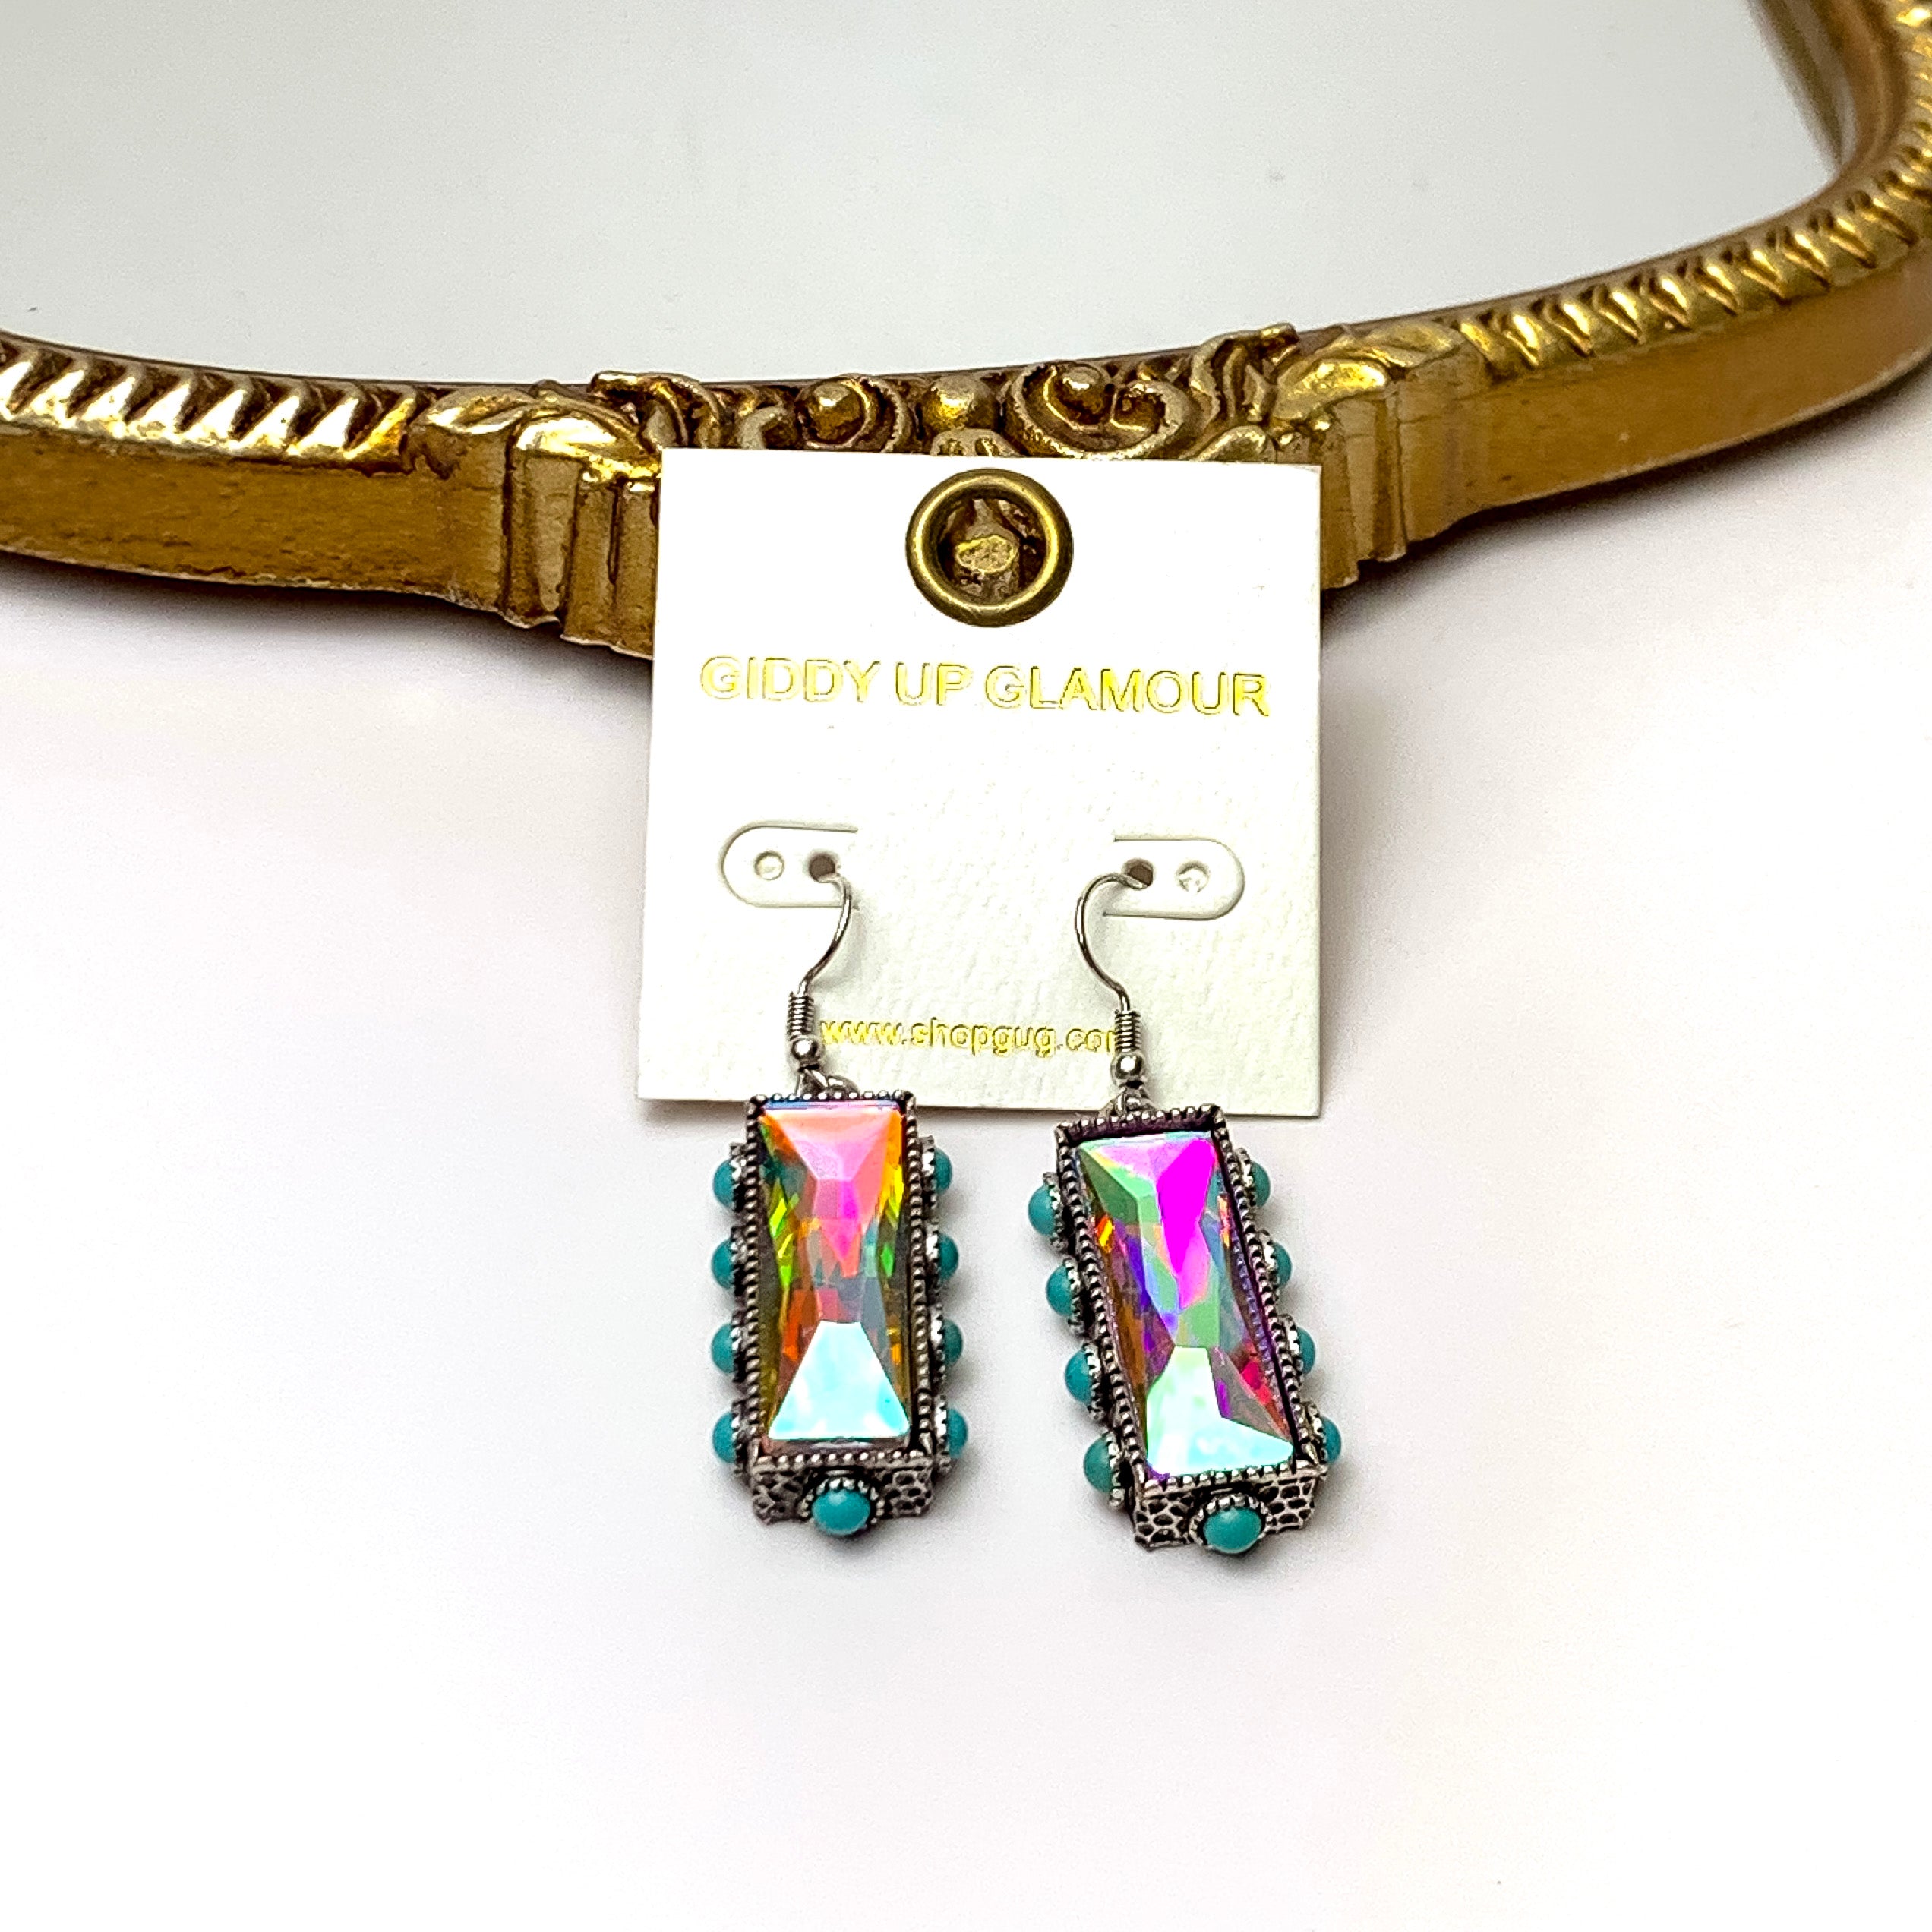 AB Crystal Bar Drop Earrings with Faux Turquoise Border Accents - Giddy Up Glamour Boutique